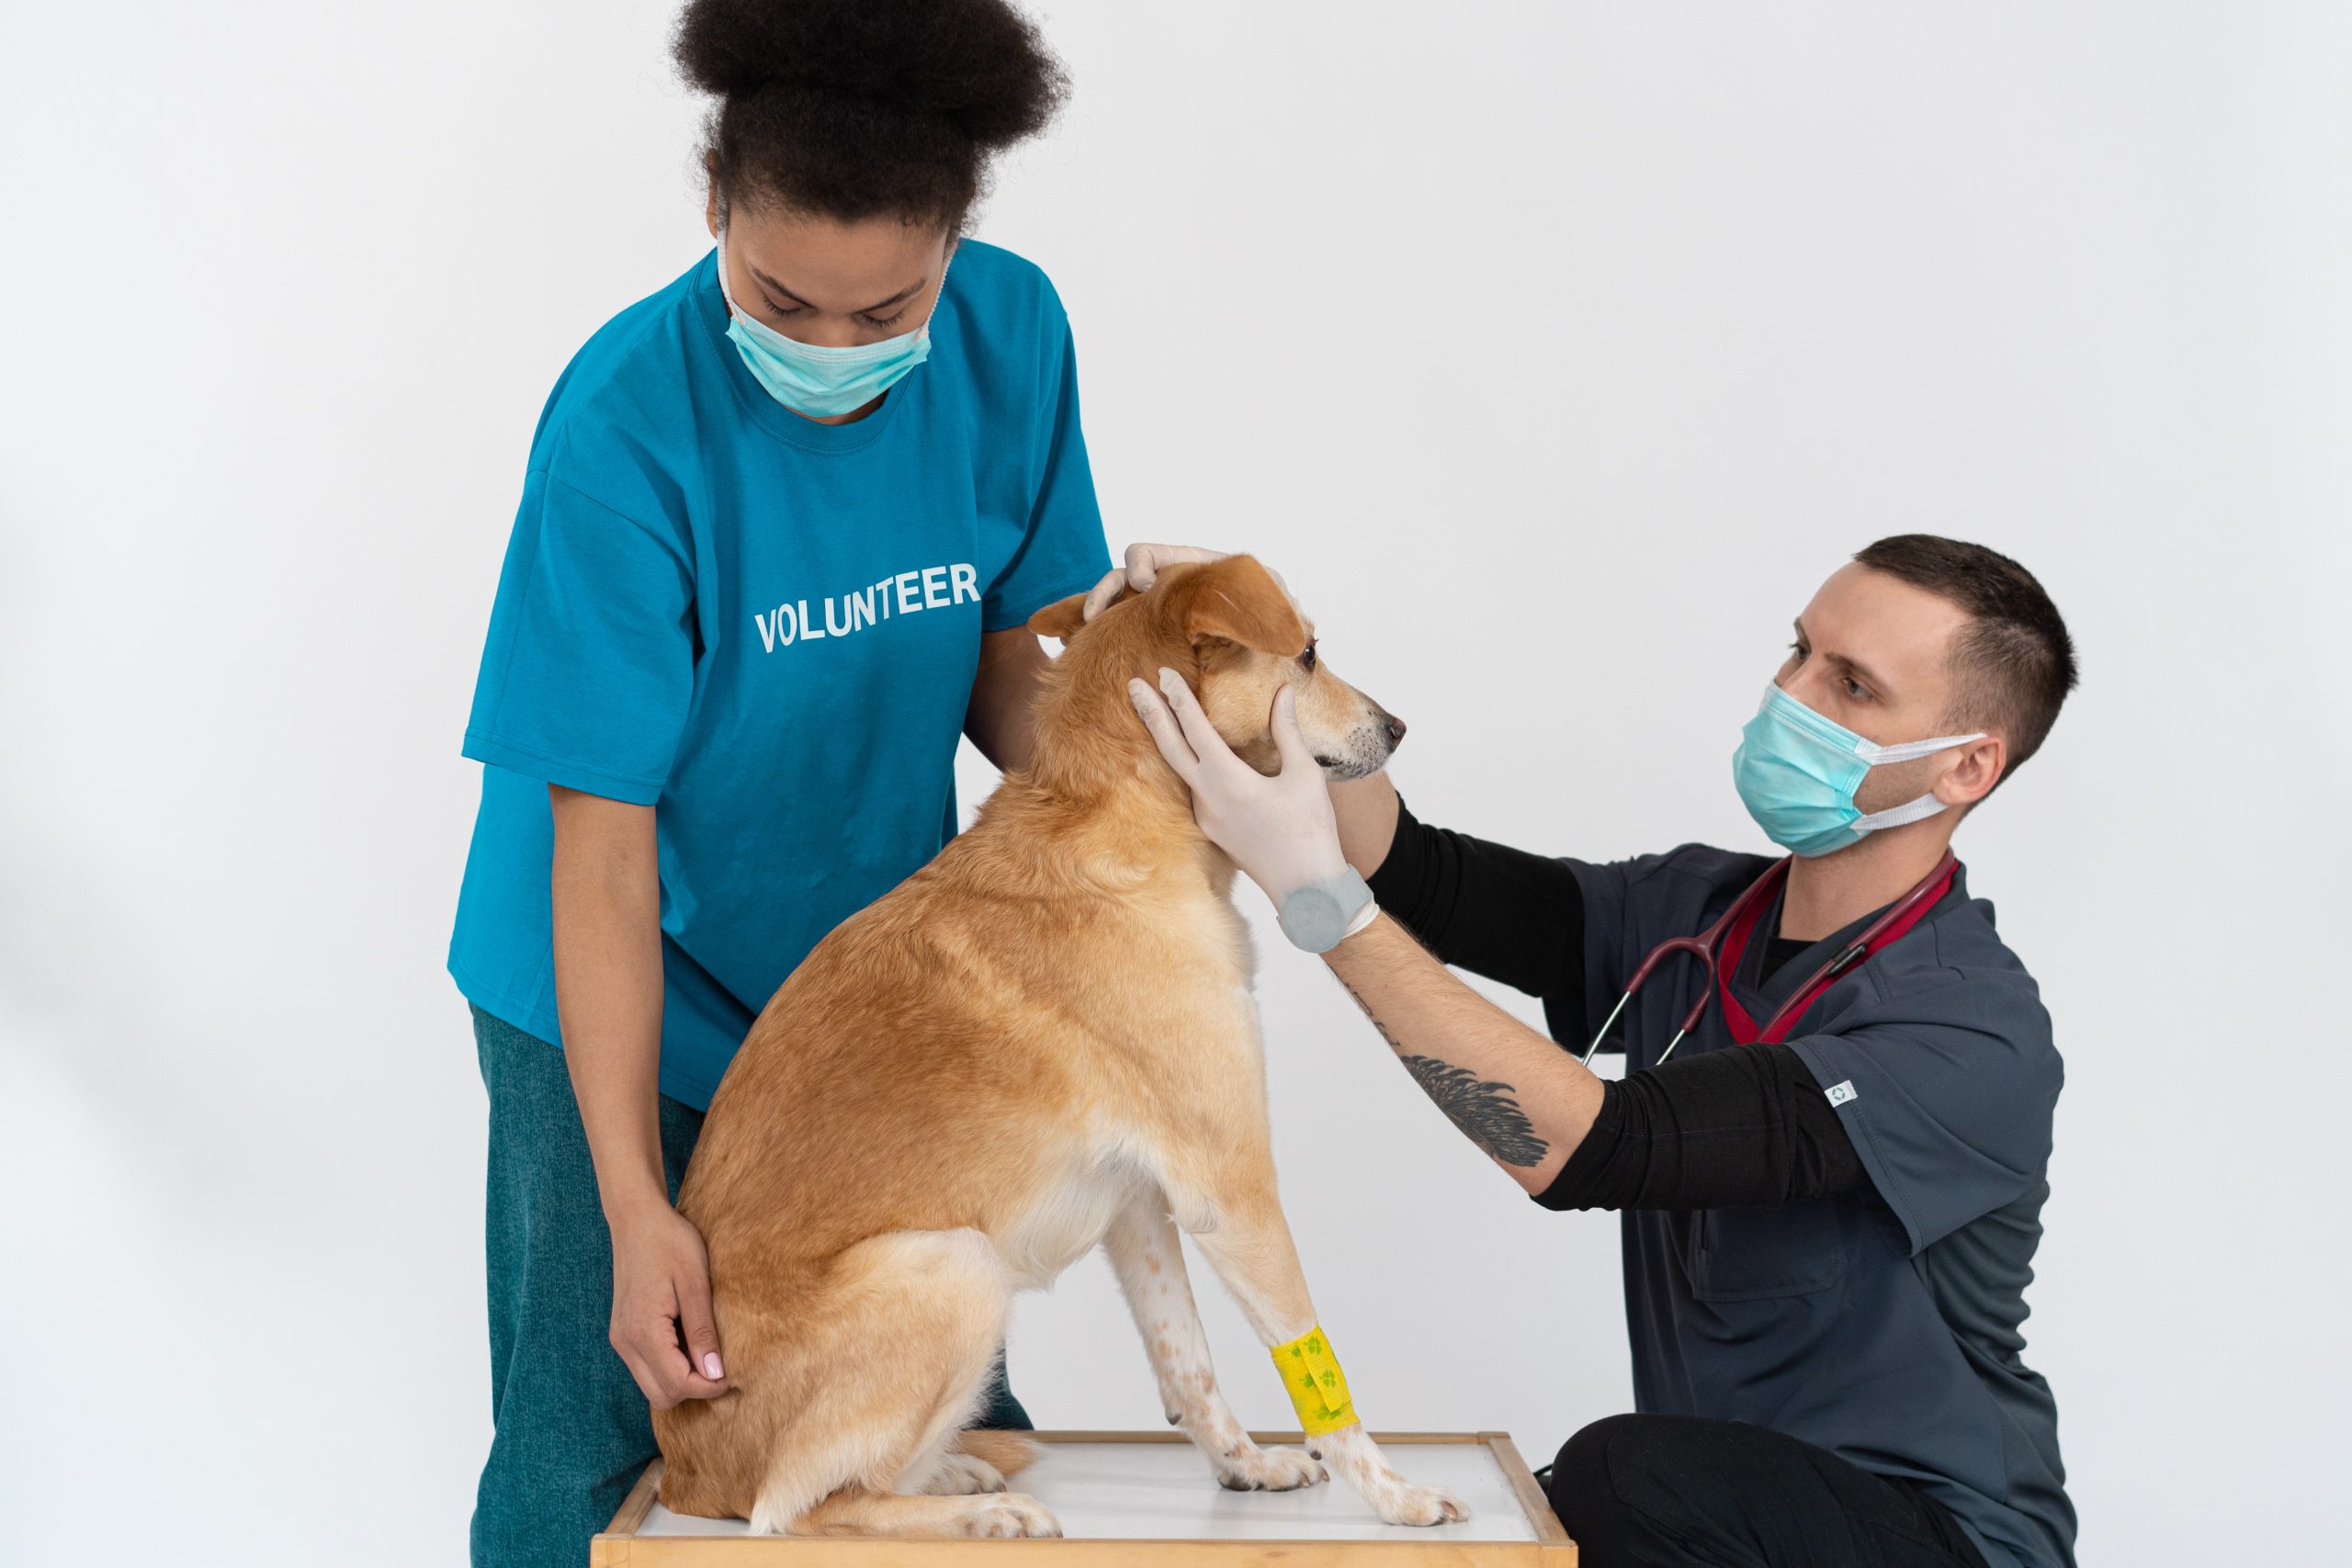 Which Signs Indicate that Your Pet Requires Immediate Medical Attention?